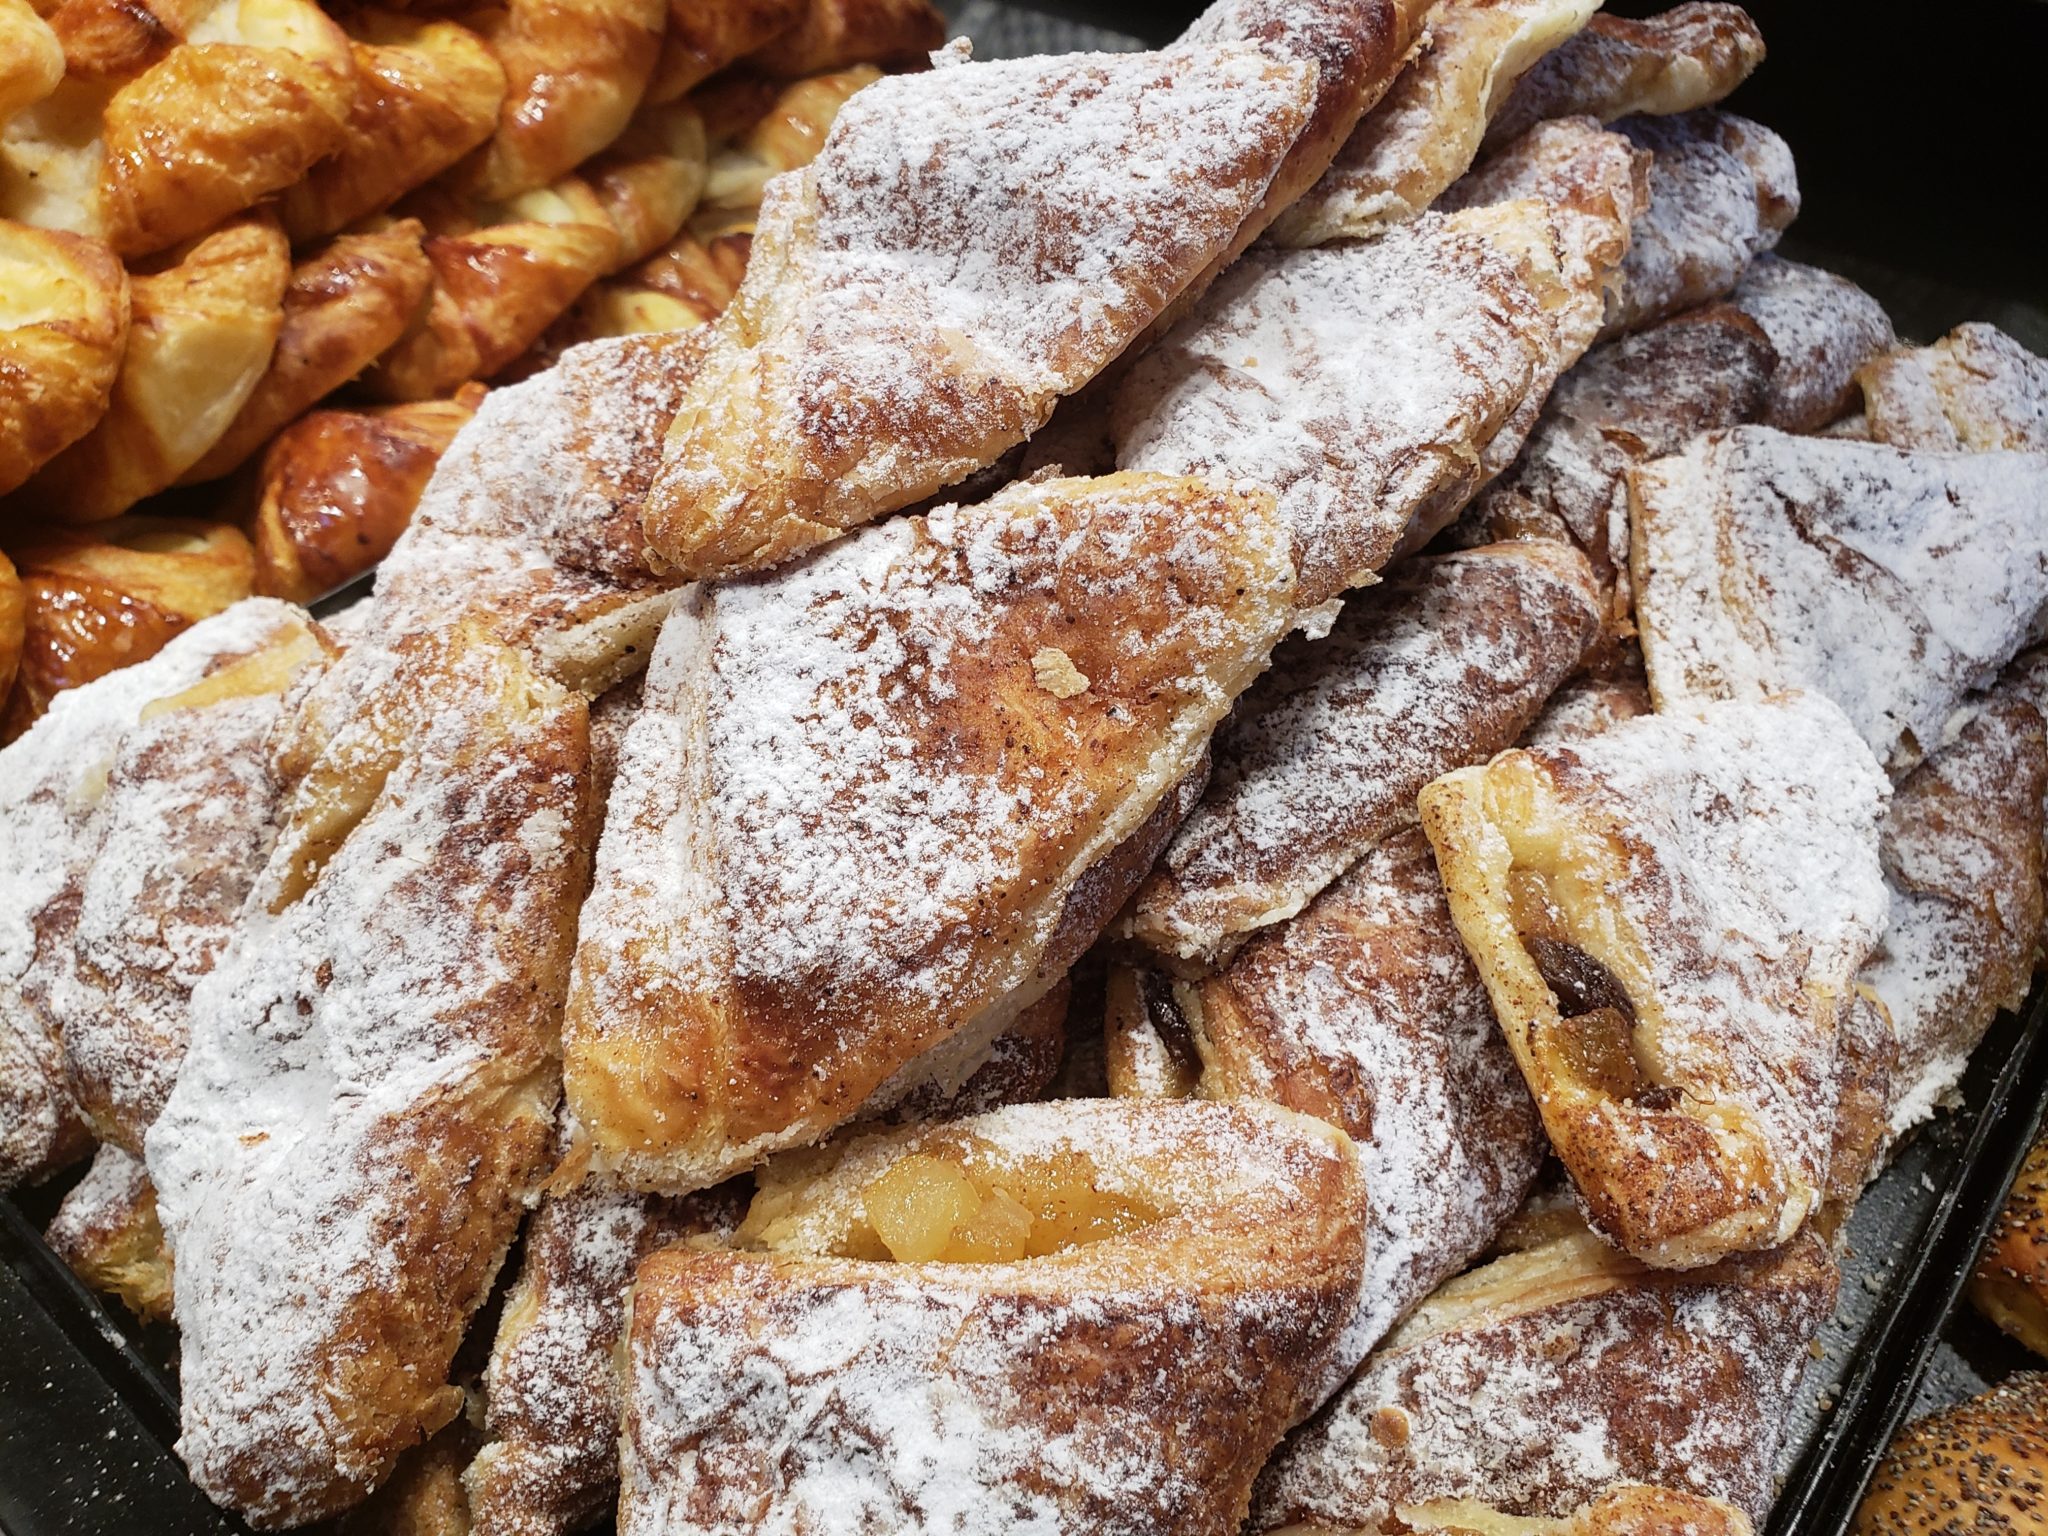 a pile of pastries with powdered sugar